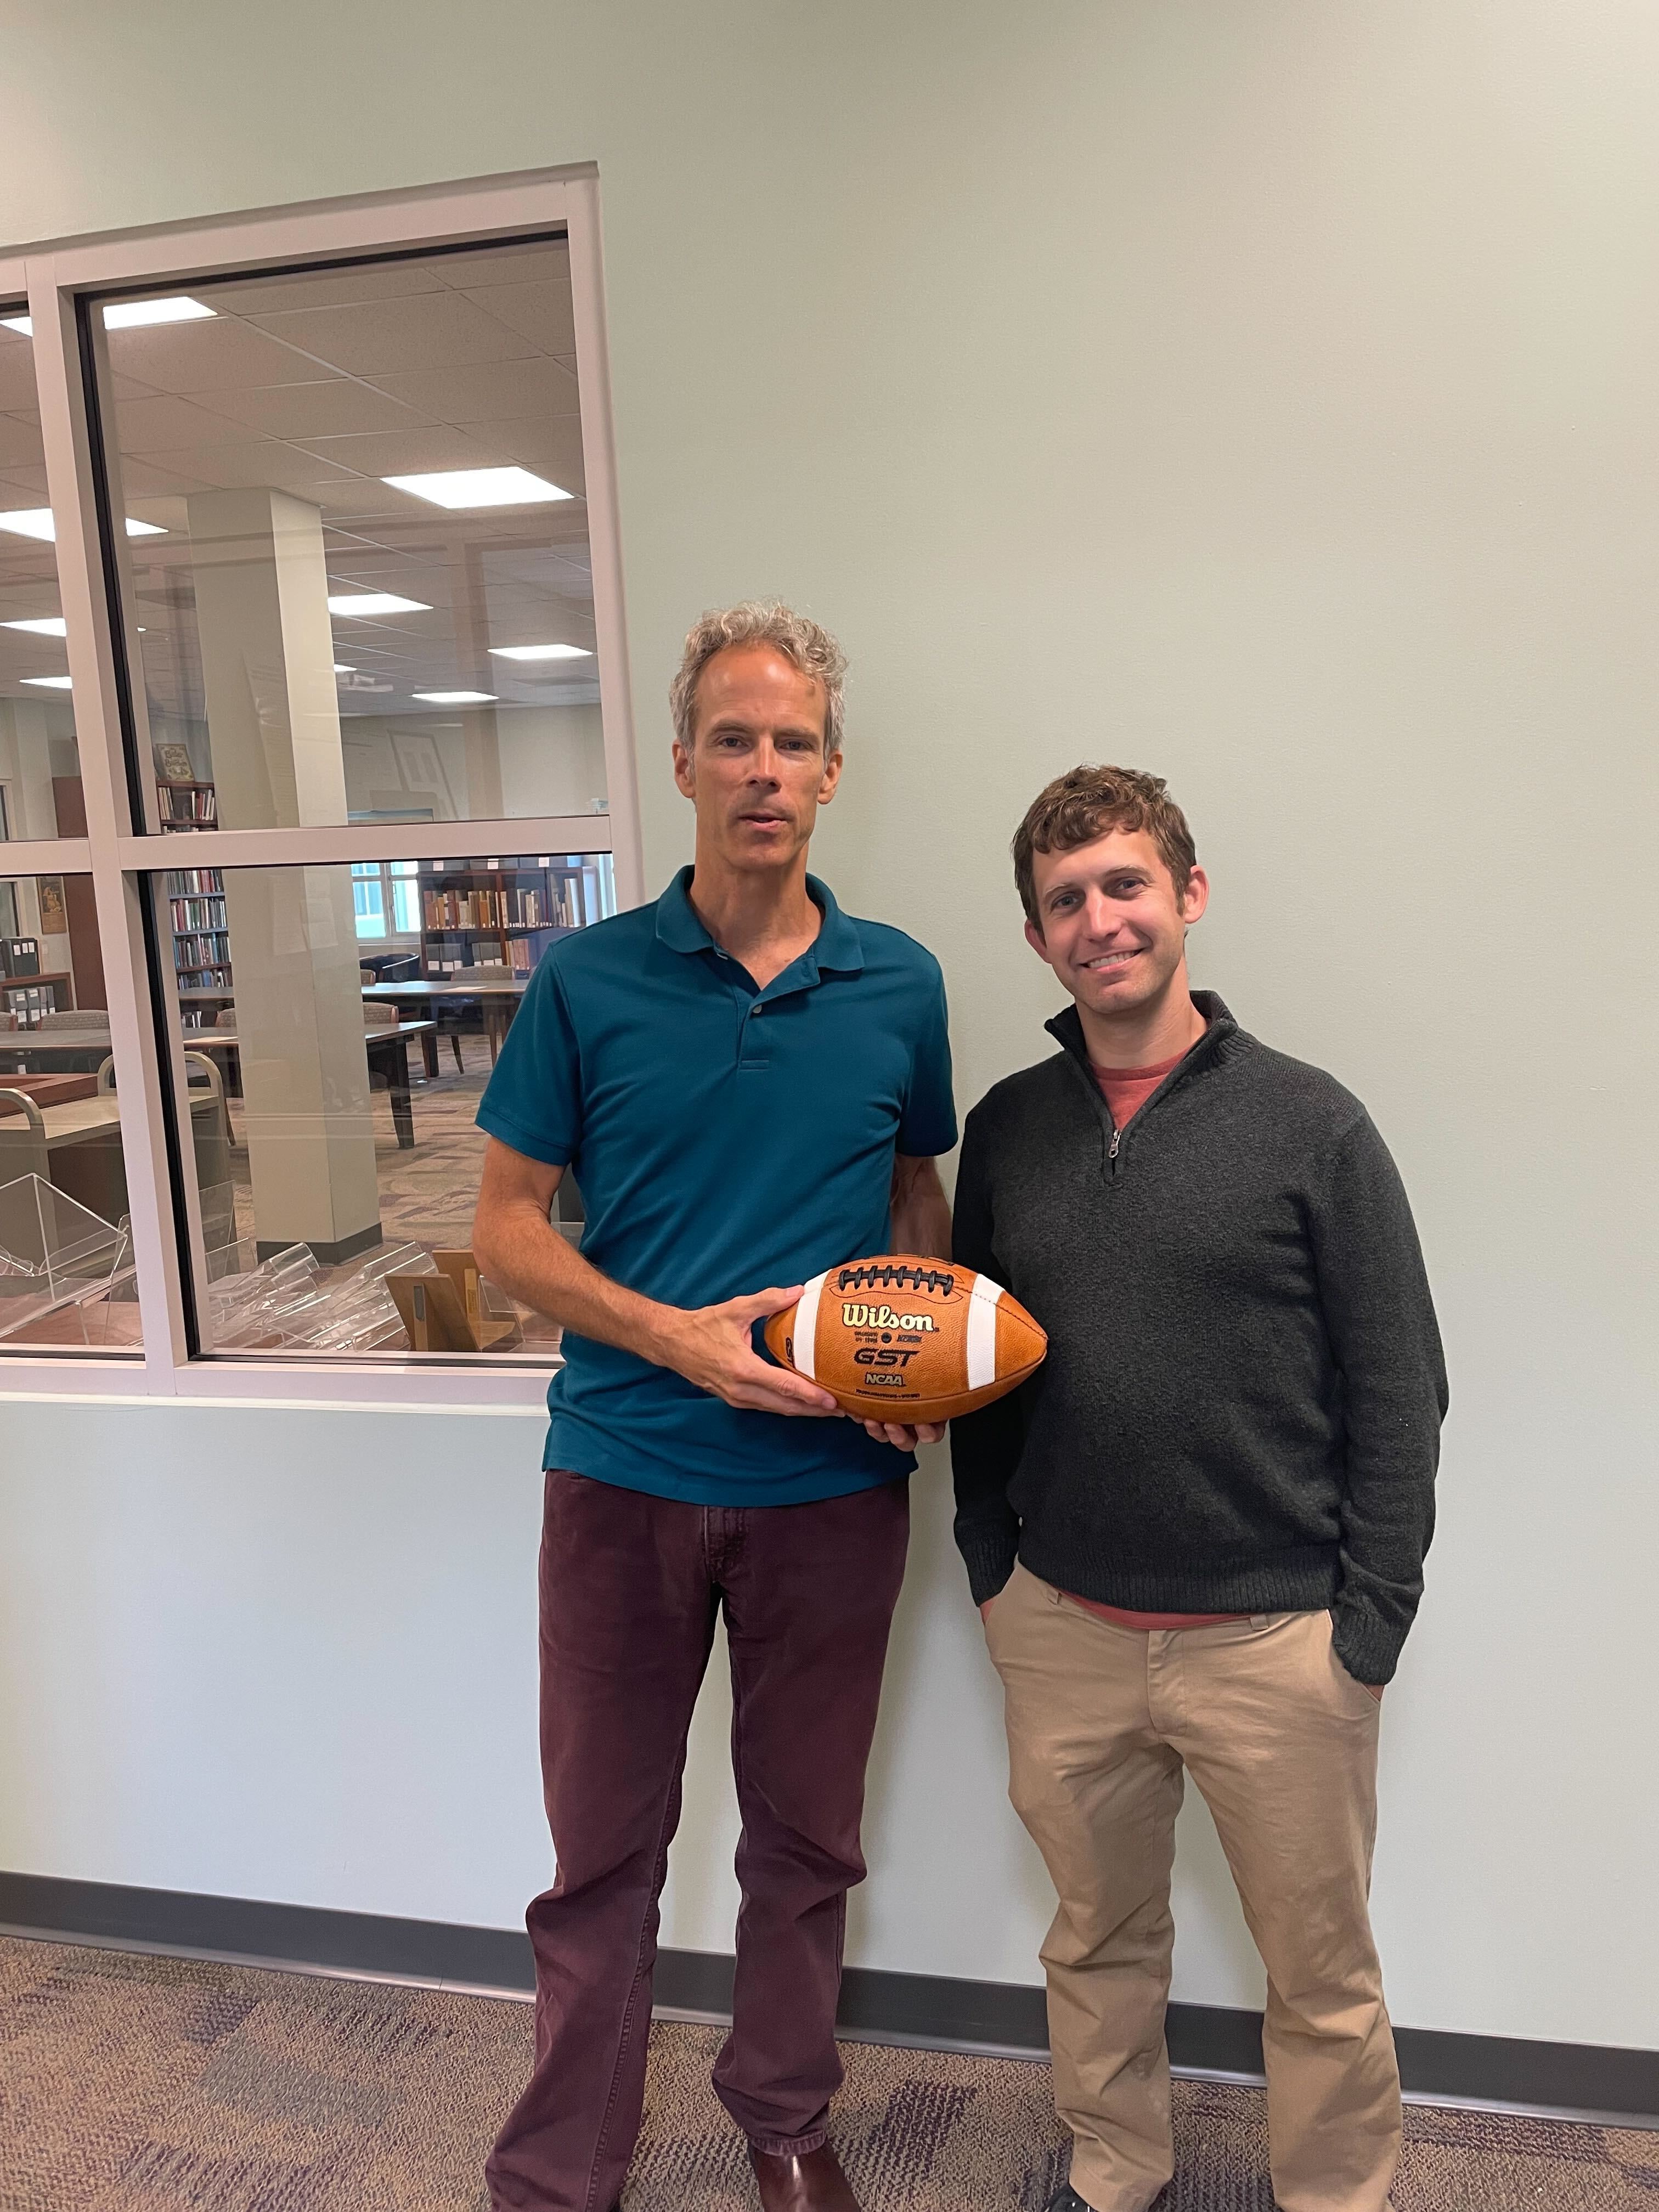 Mark Wolfe (left) and Greg Wiedeman (right) holding a football